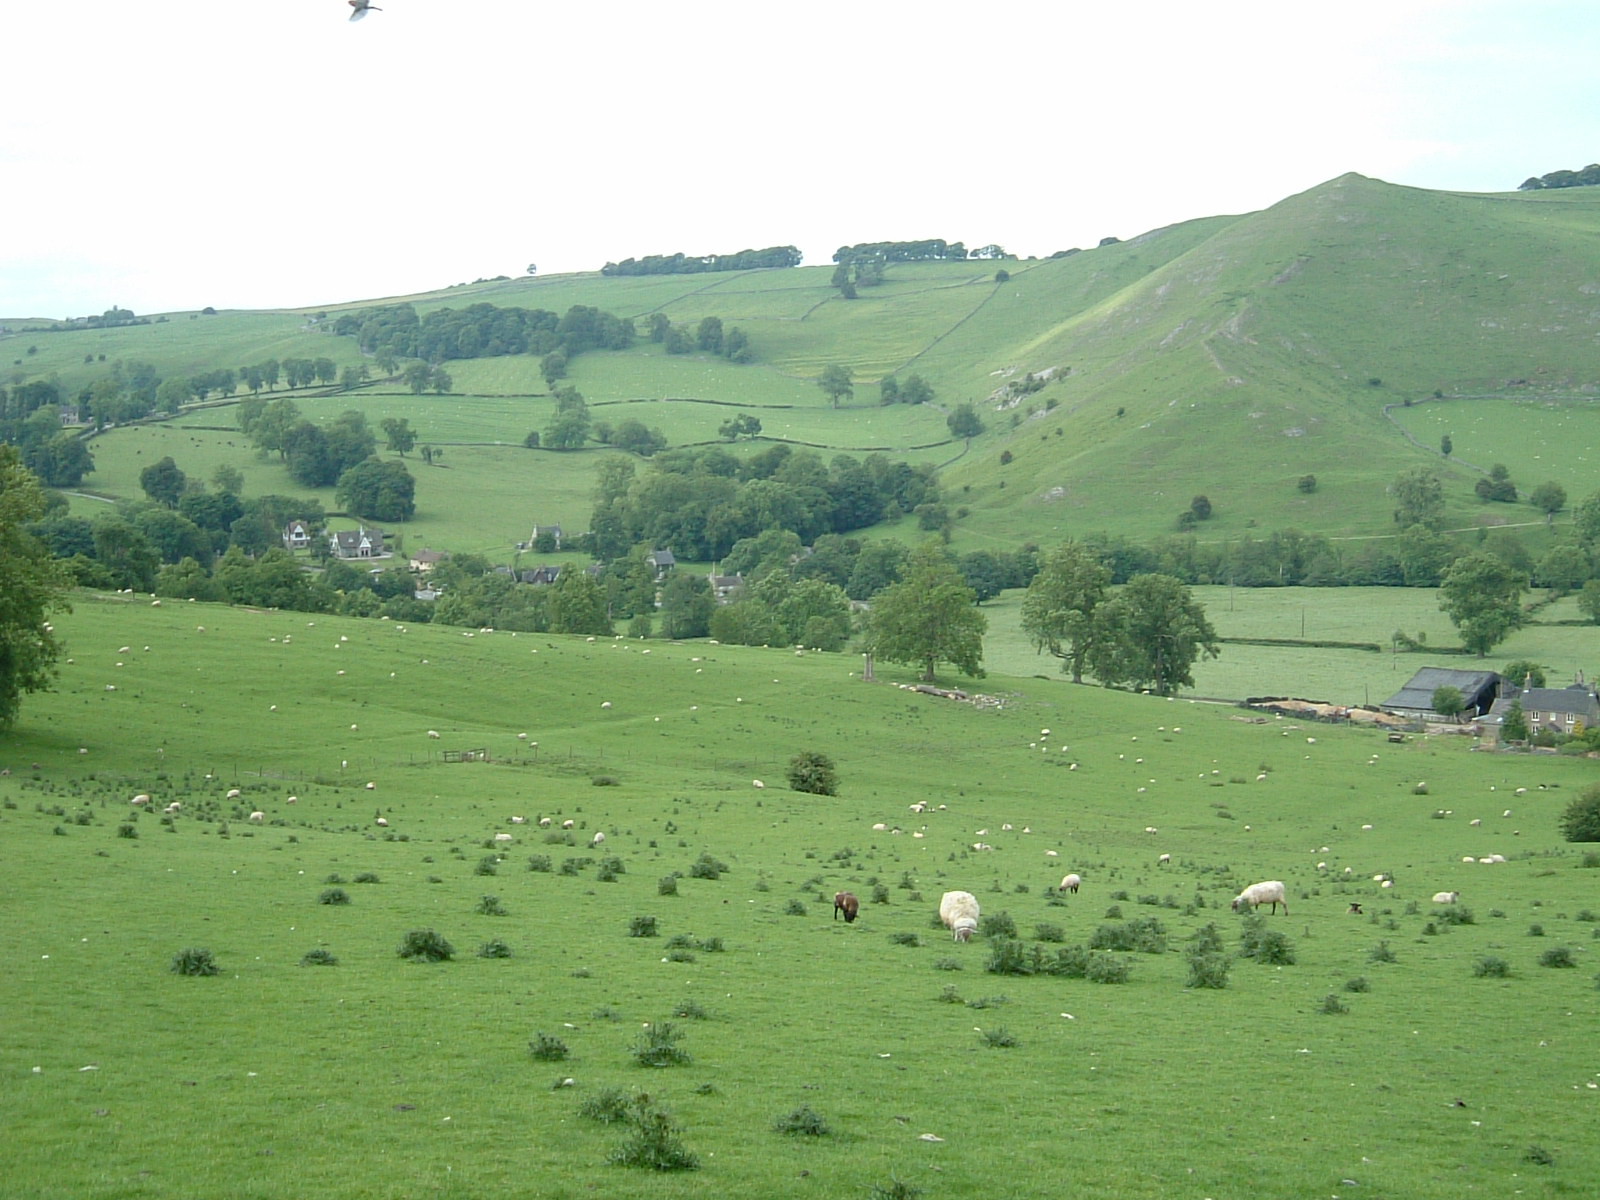 Ilam from a distance